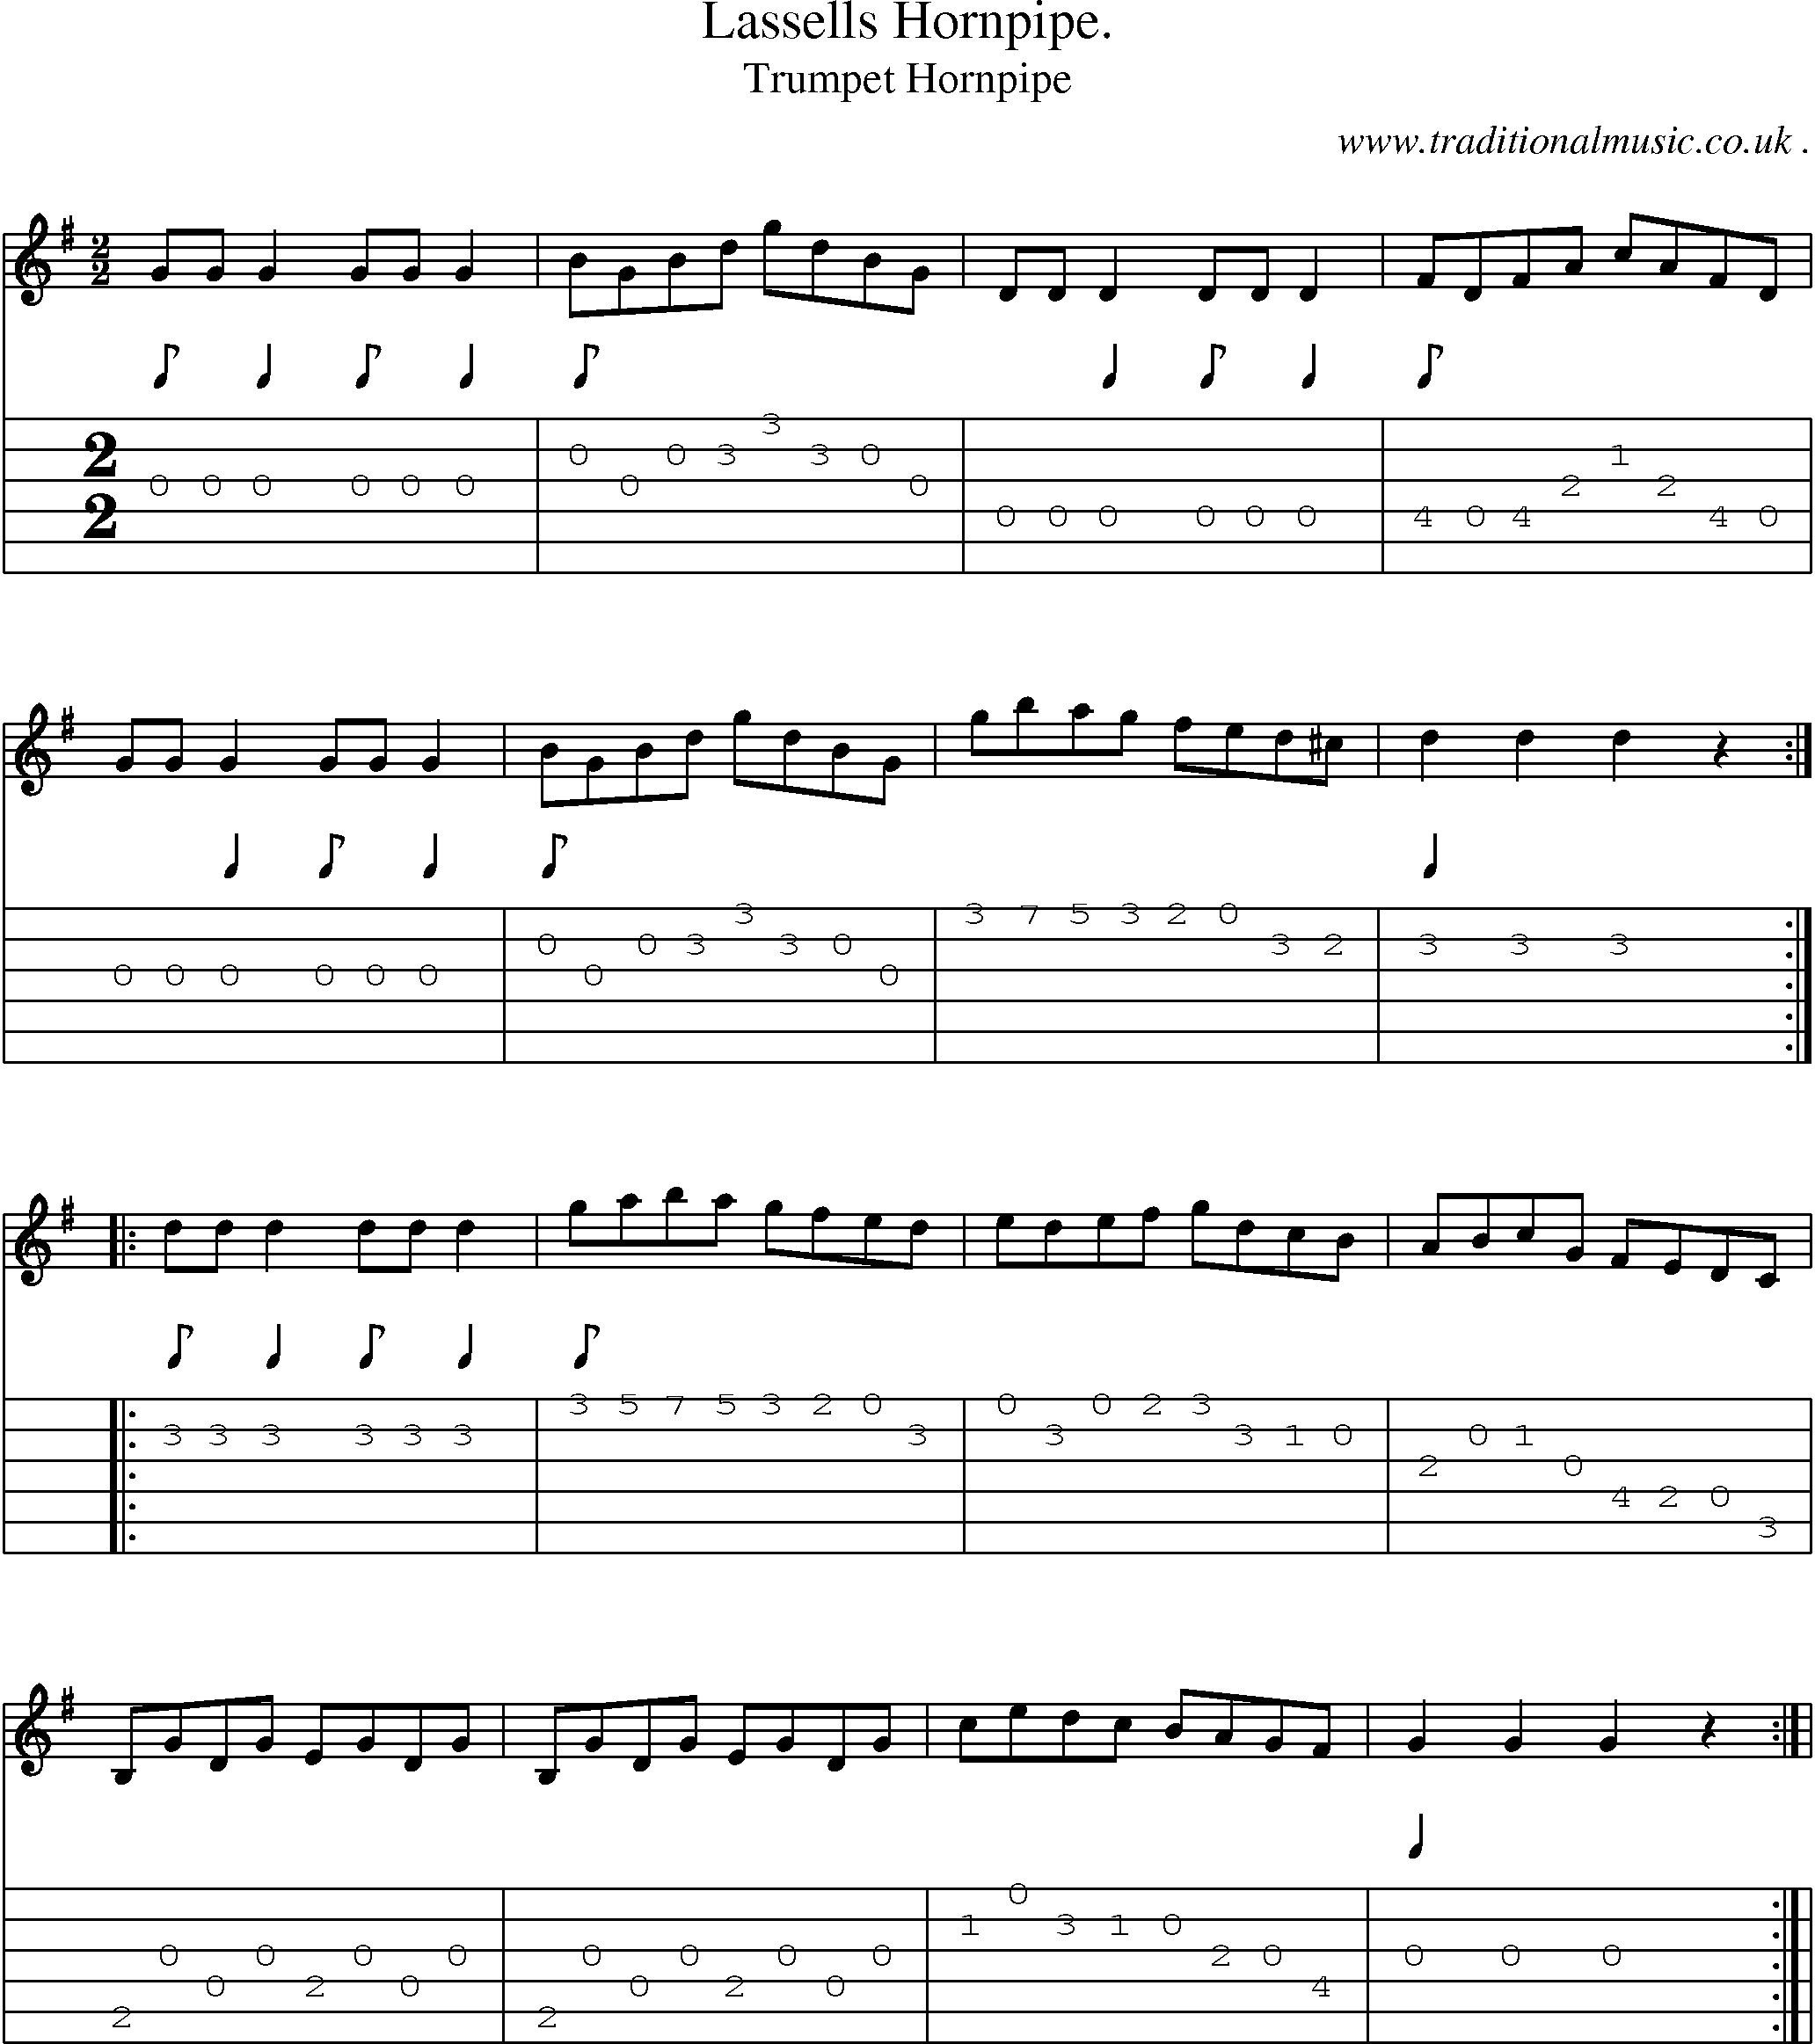 Sheet-Music and Guitar Tabs for Lassells Hornpipe